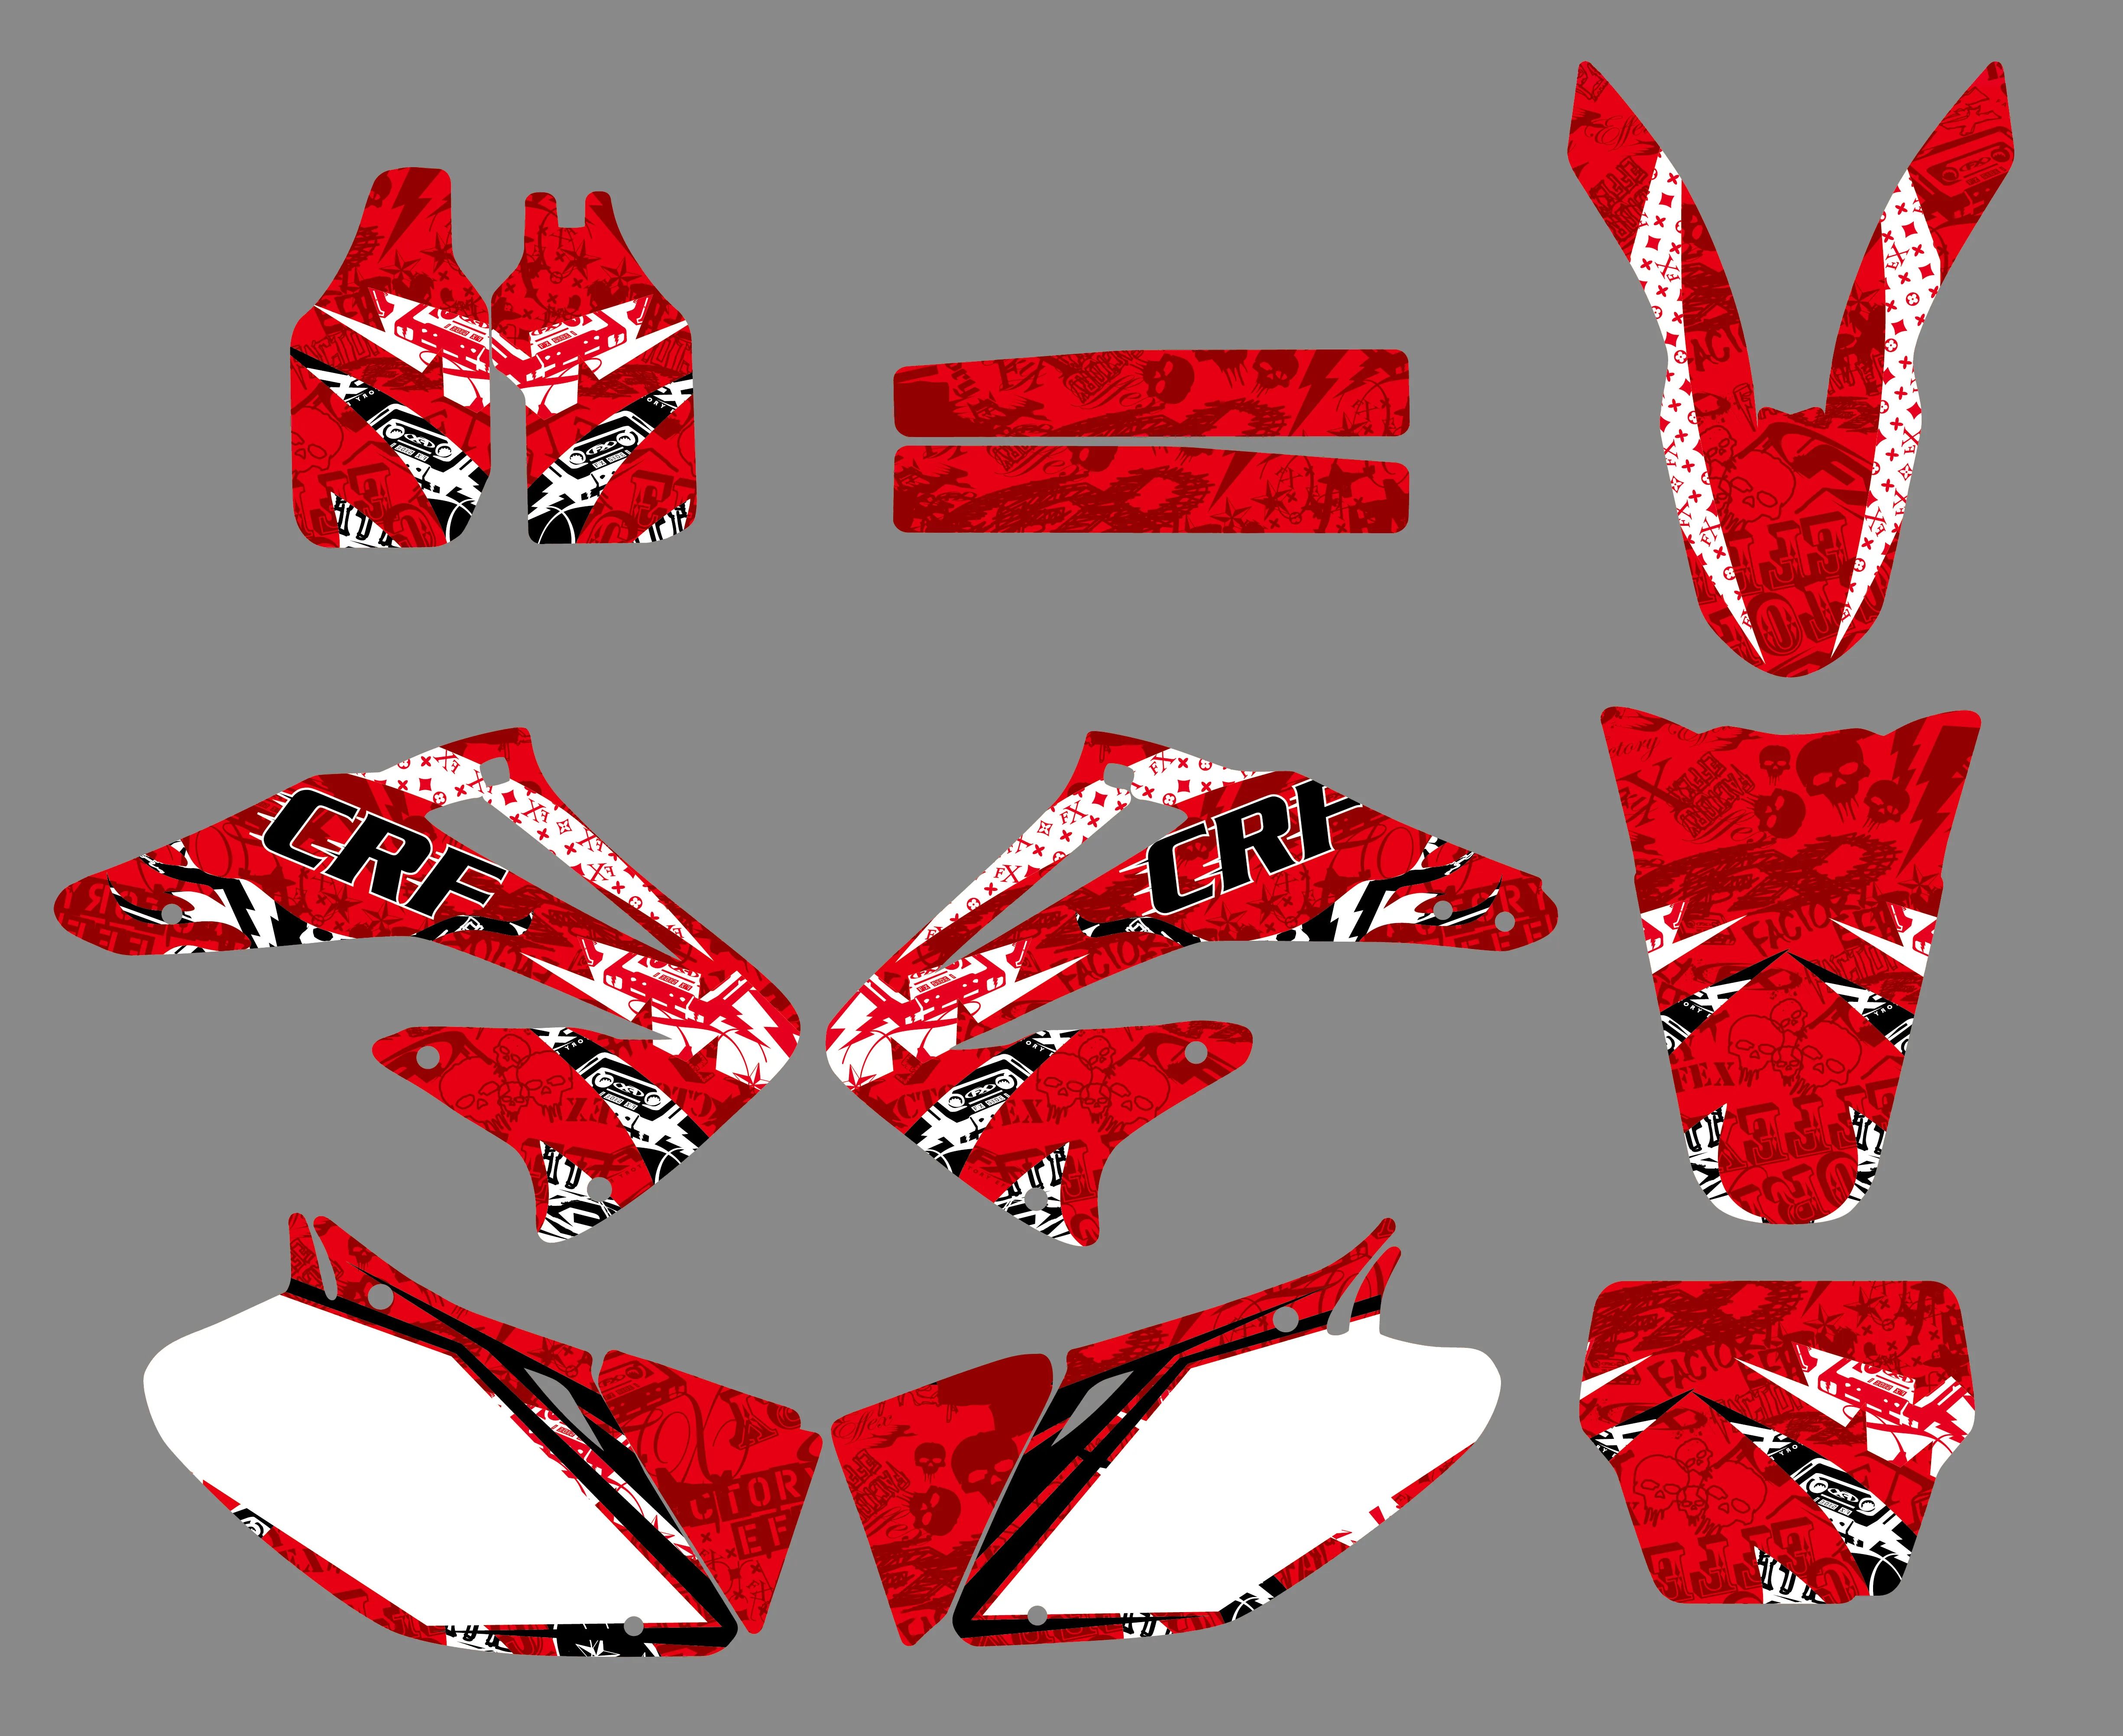 motorcycle-team-full-plastic-graphics-background-sticker-decal-kits-for-honda-crf450r-crf450-2002-2003-2004-crf-450-r-450r